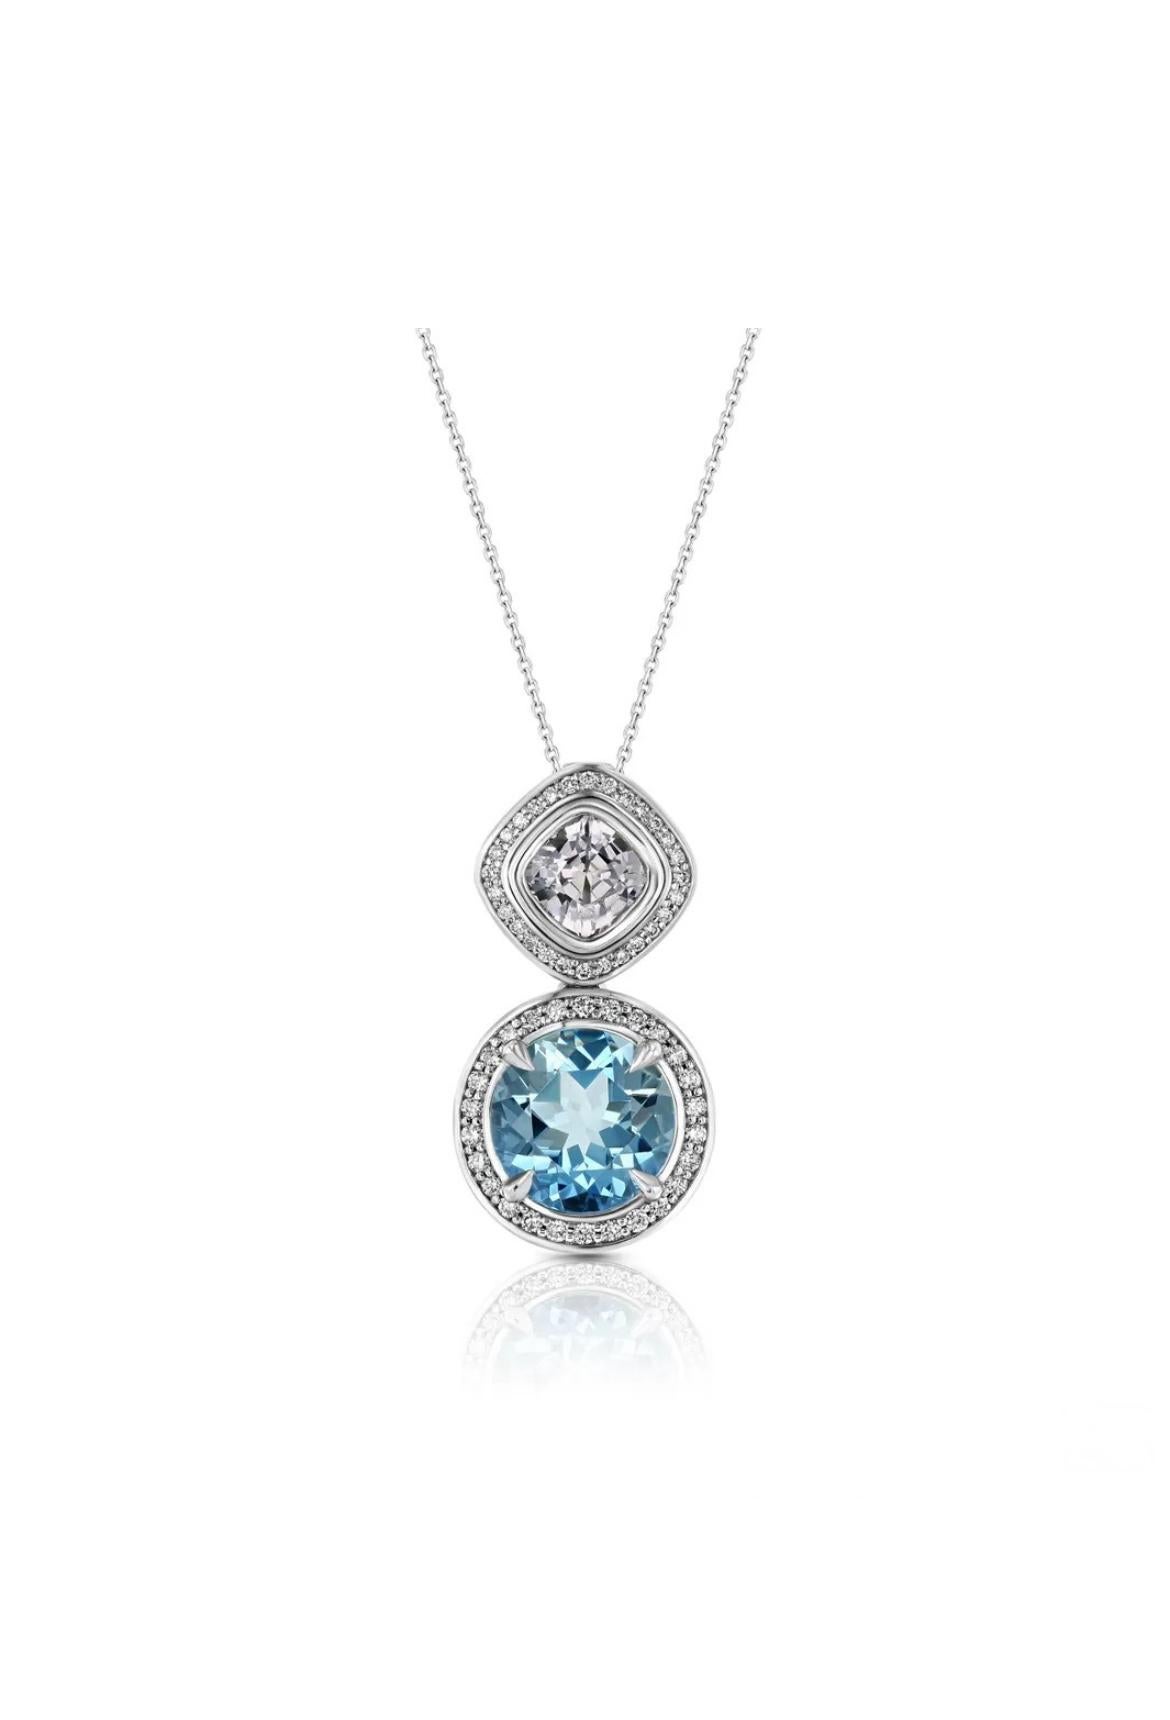 Round Cut 3.11ct Aquamarine and 1.22ct Lavender Spinel 18K white gold pendant. For Sale